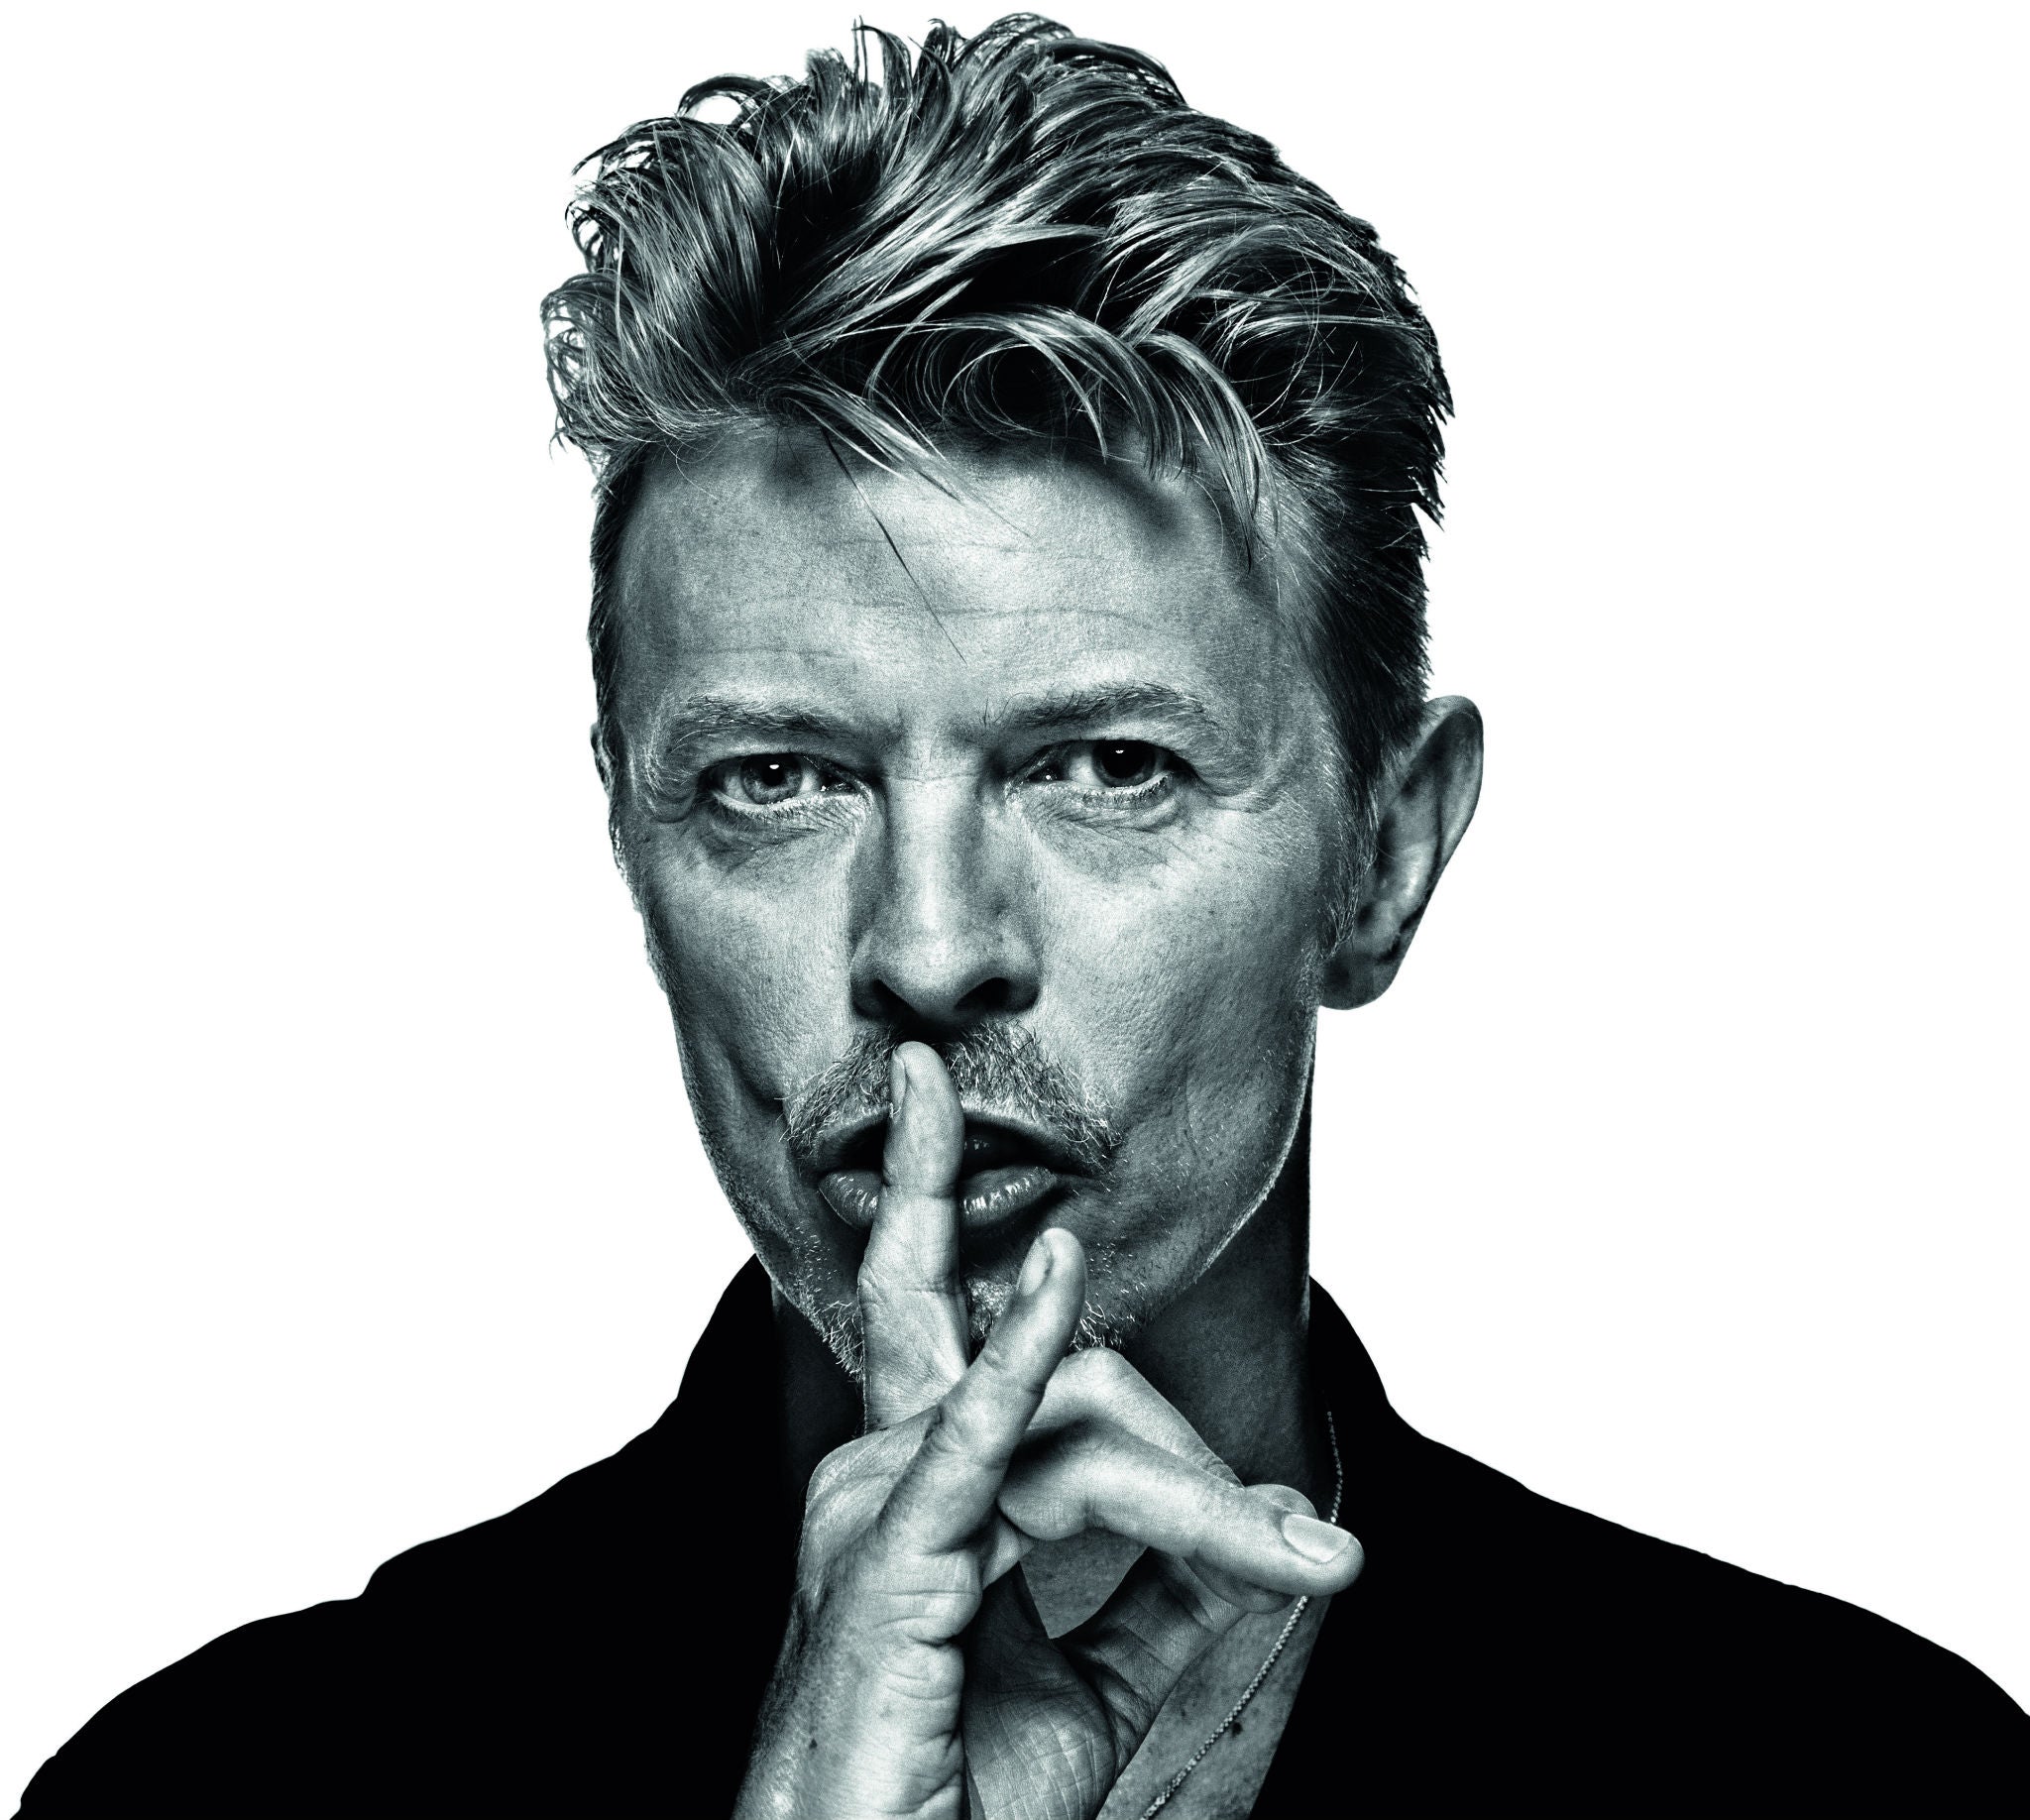 Singer and art collector David Bowie, who died earlier this year